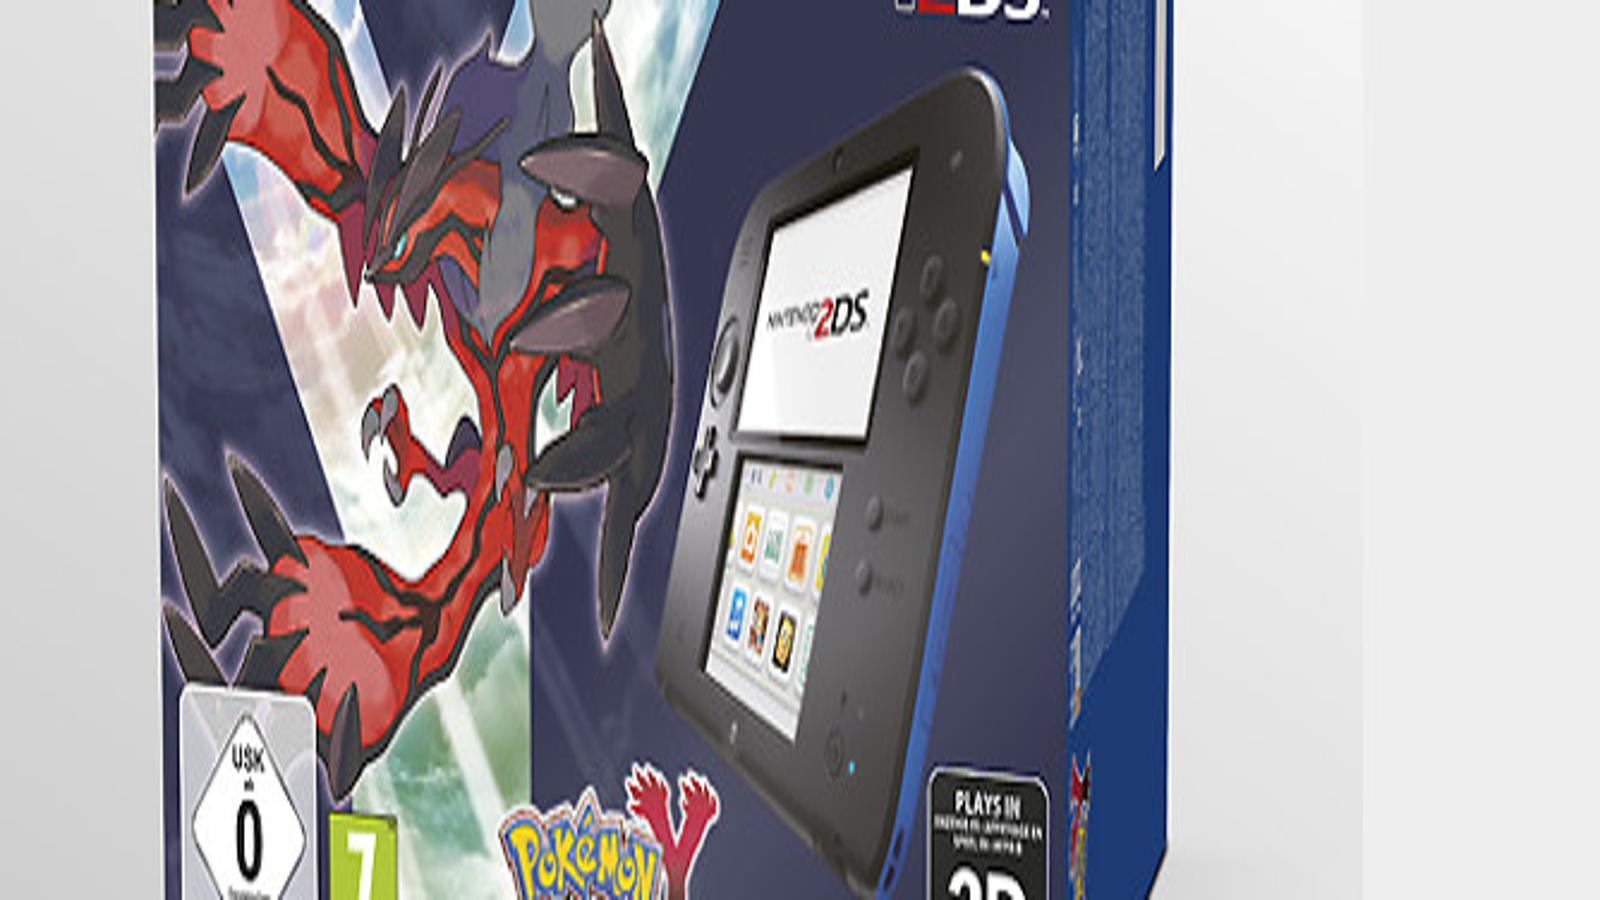 & | VG247 Pokemon Europe X Y in spotted 2DS bundles